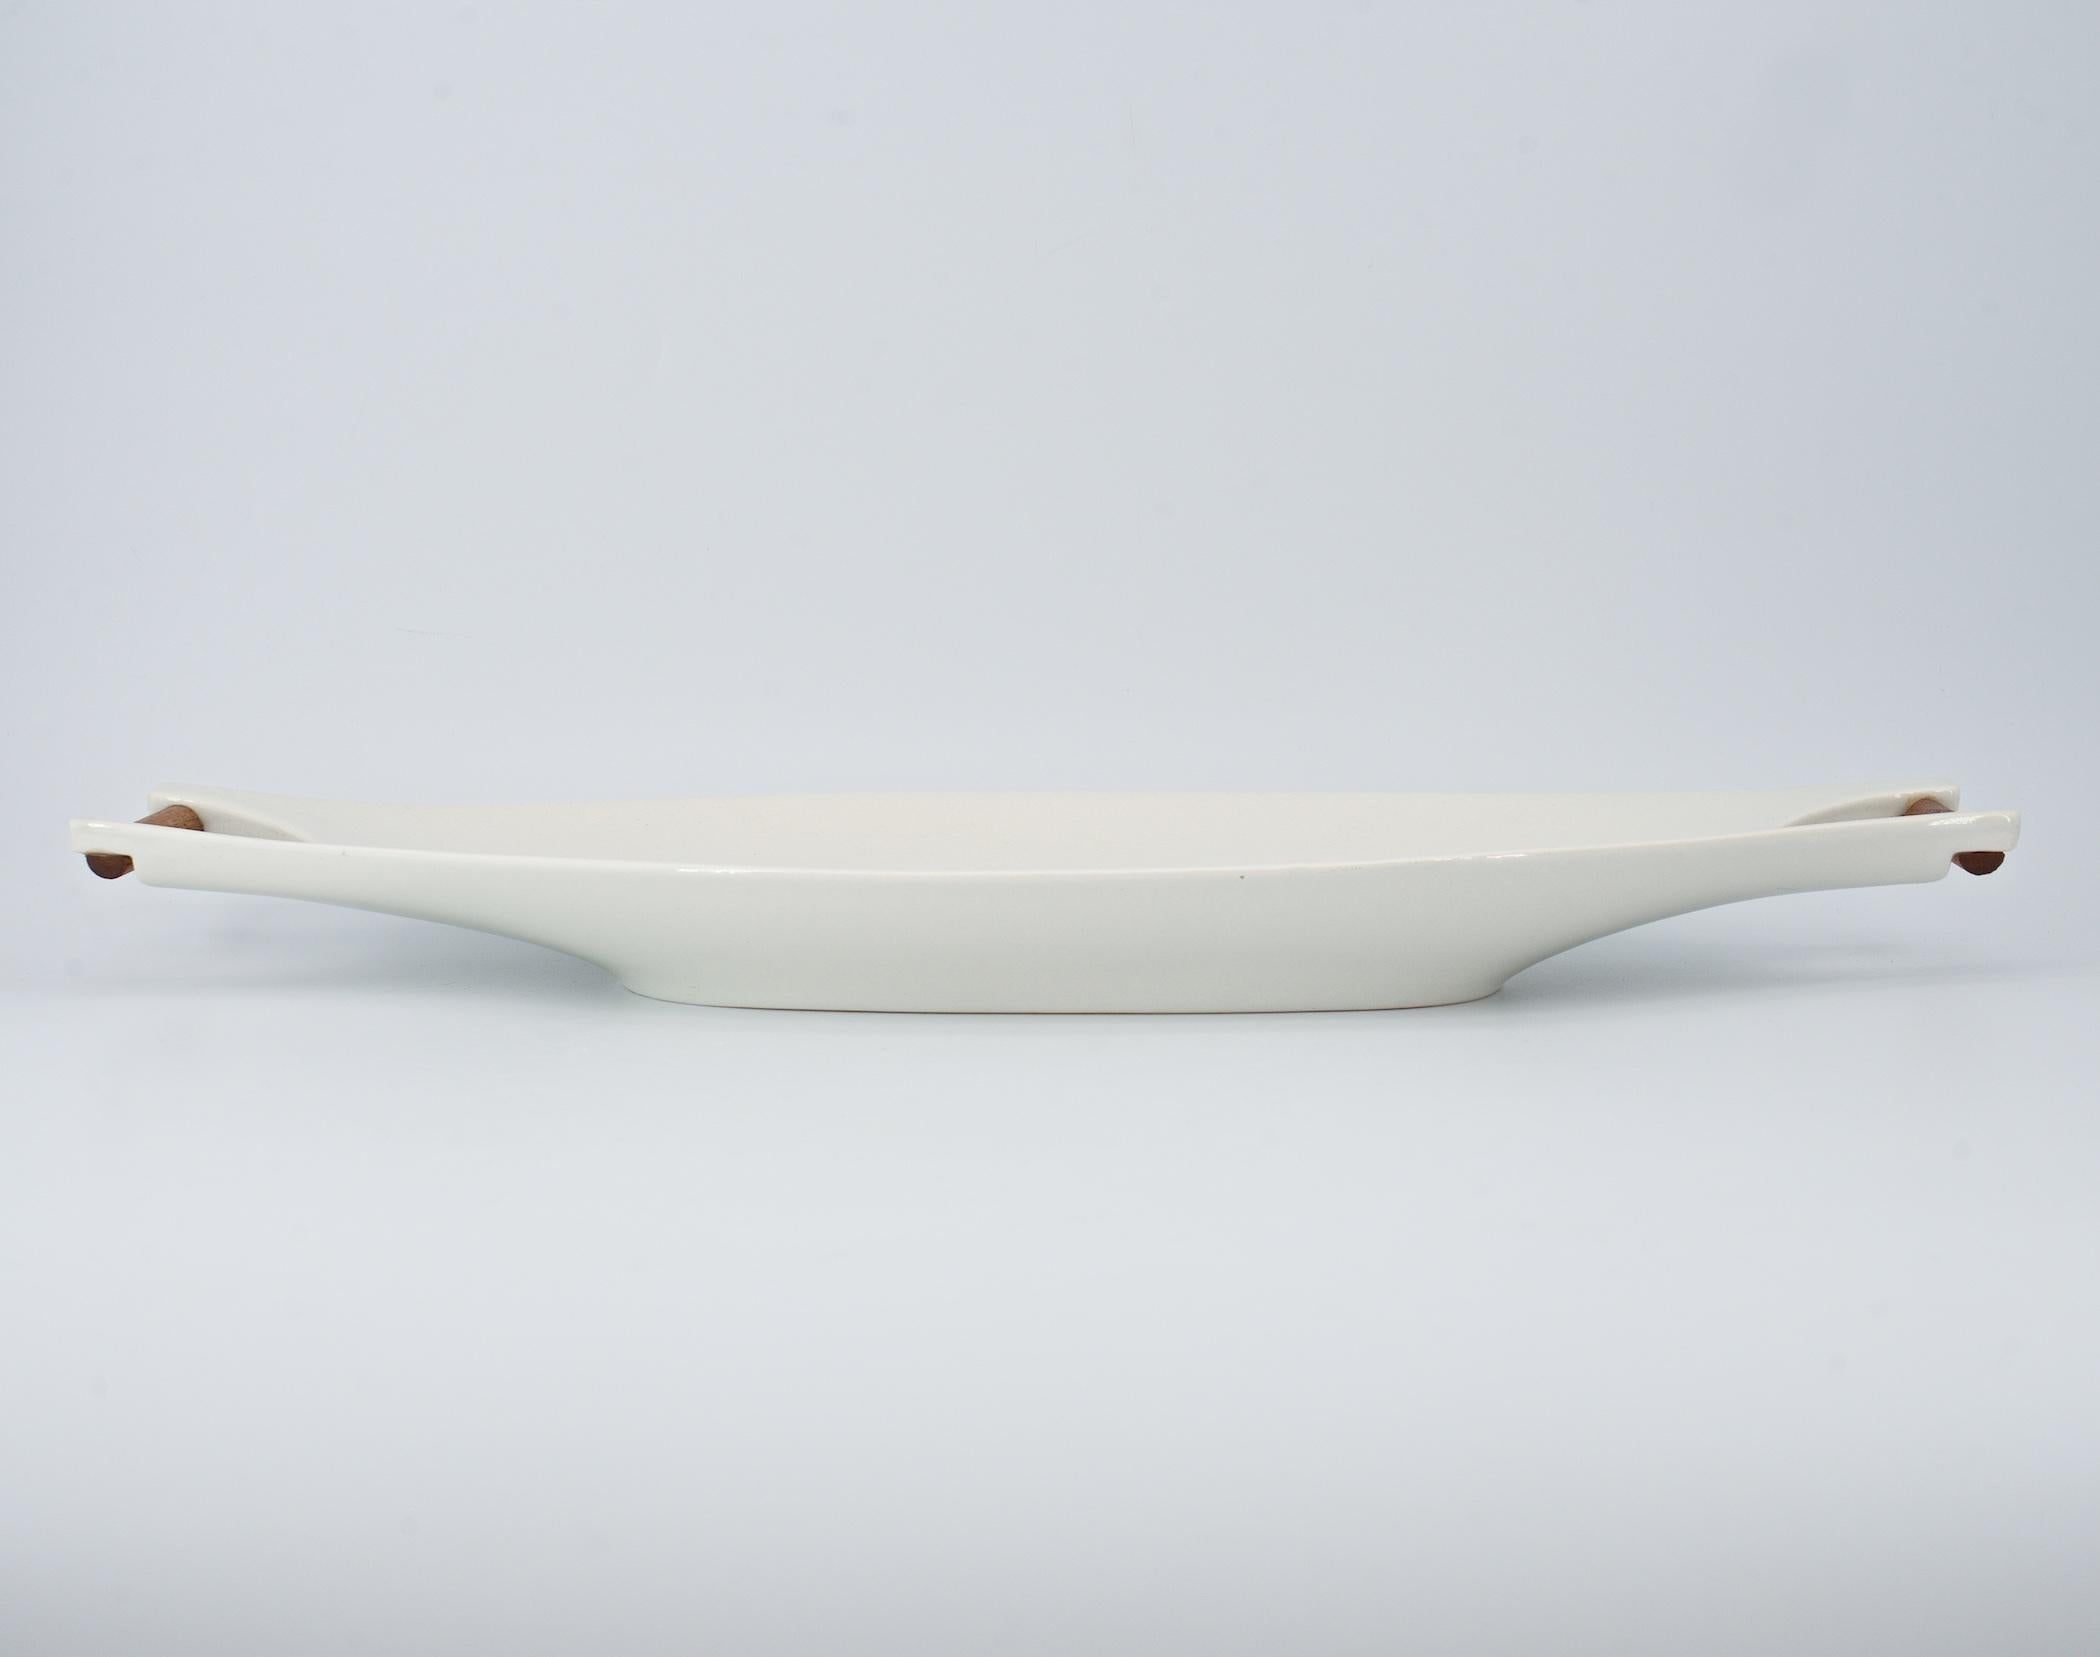 Sculptural masterpiece in tableware, with a classic mid-century mix of materials.